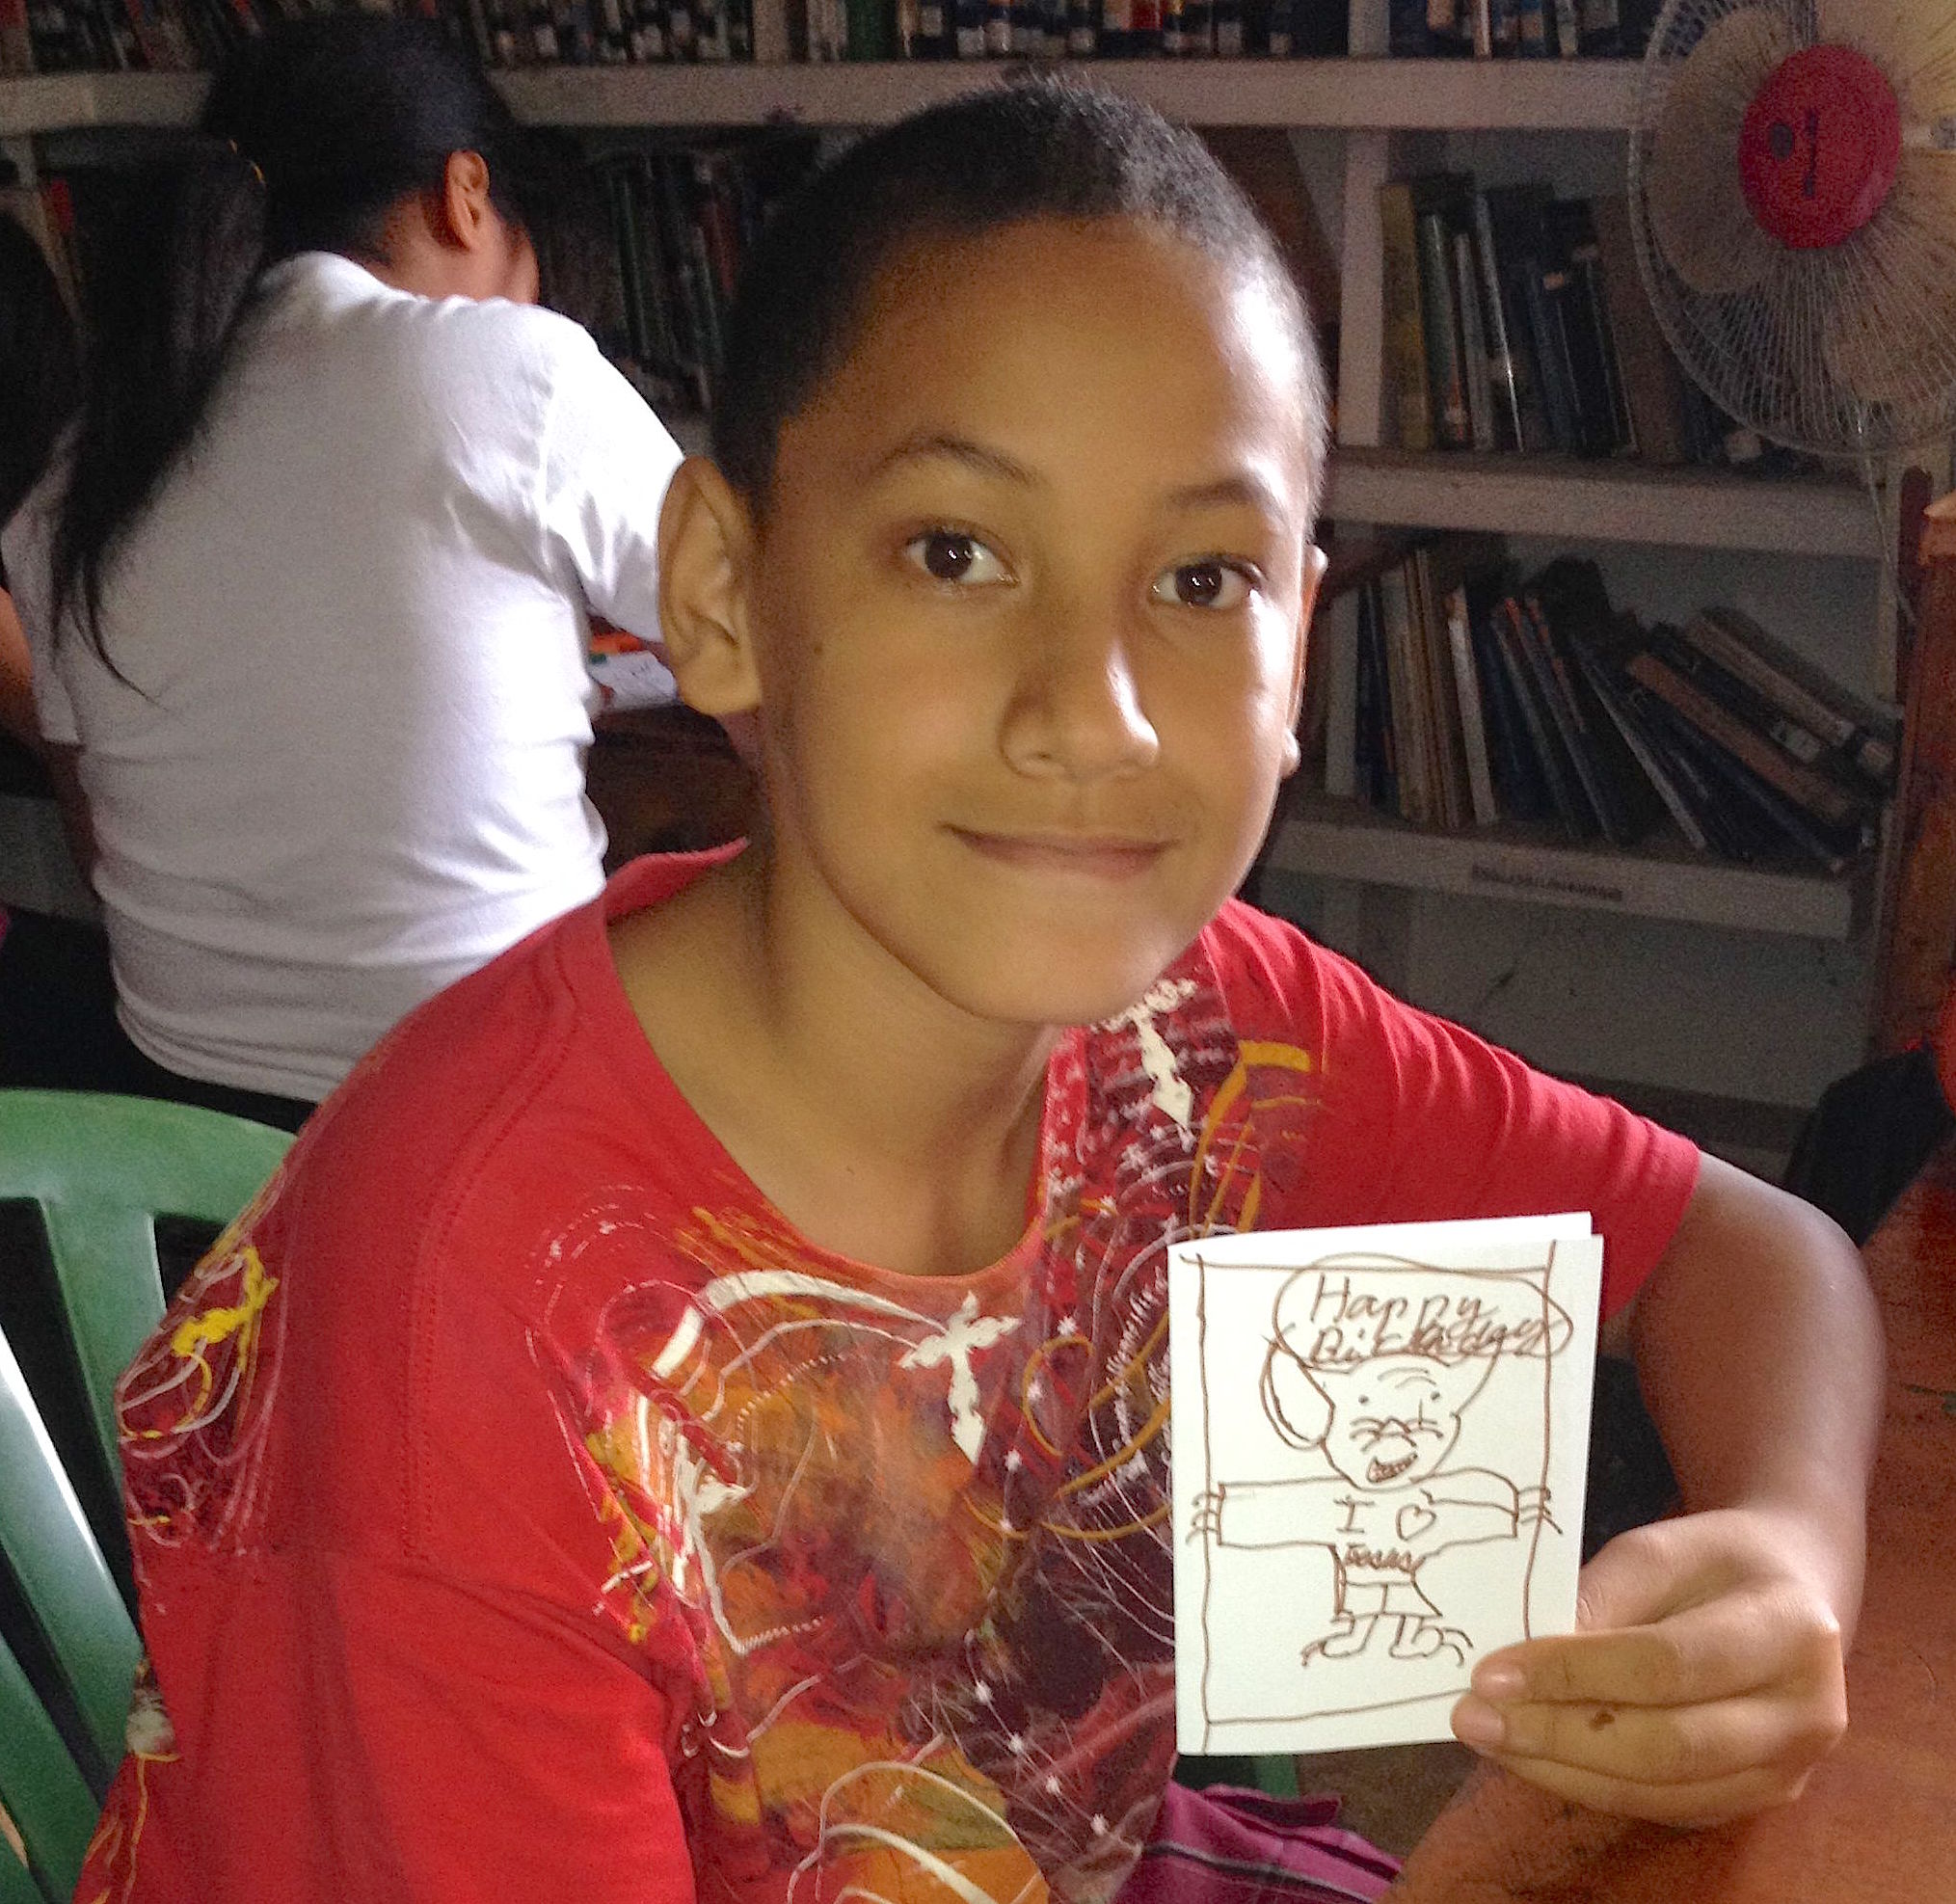 145. This awesome young Tongan boy made a super card showing obedience to the Lord